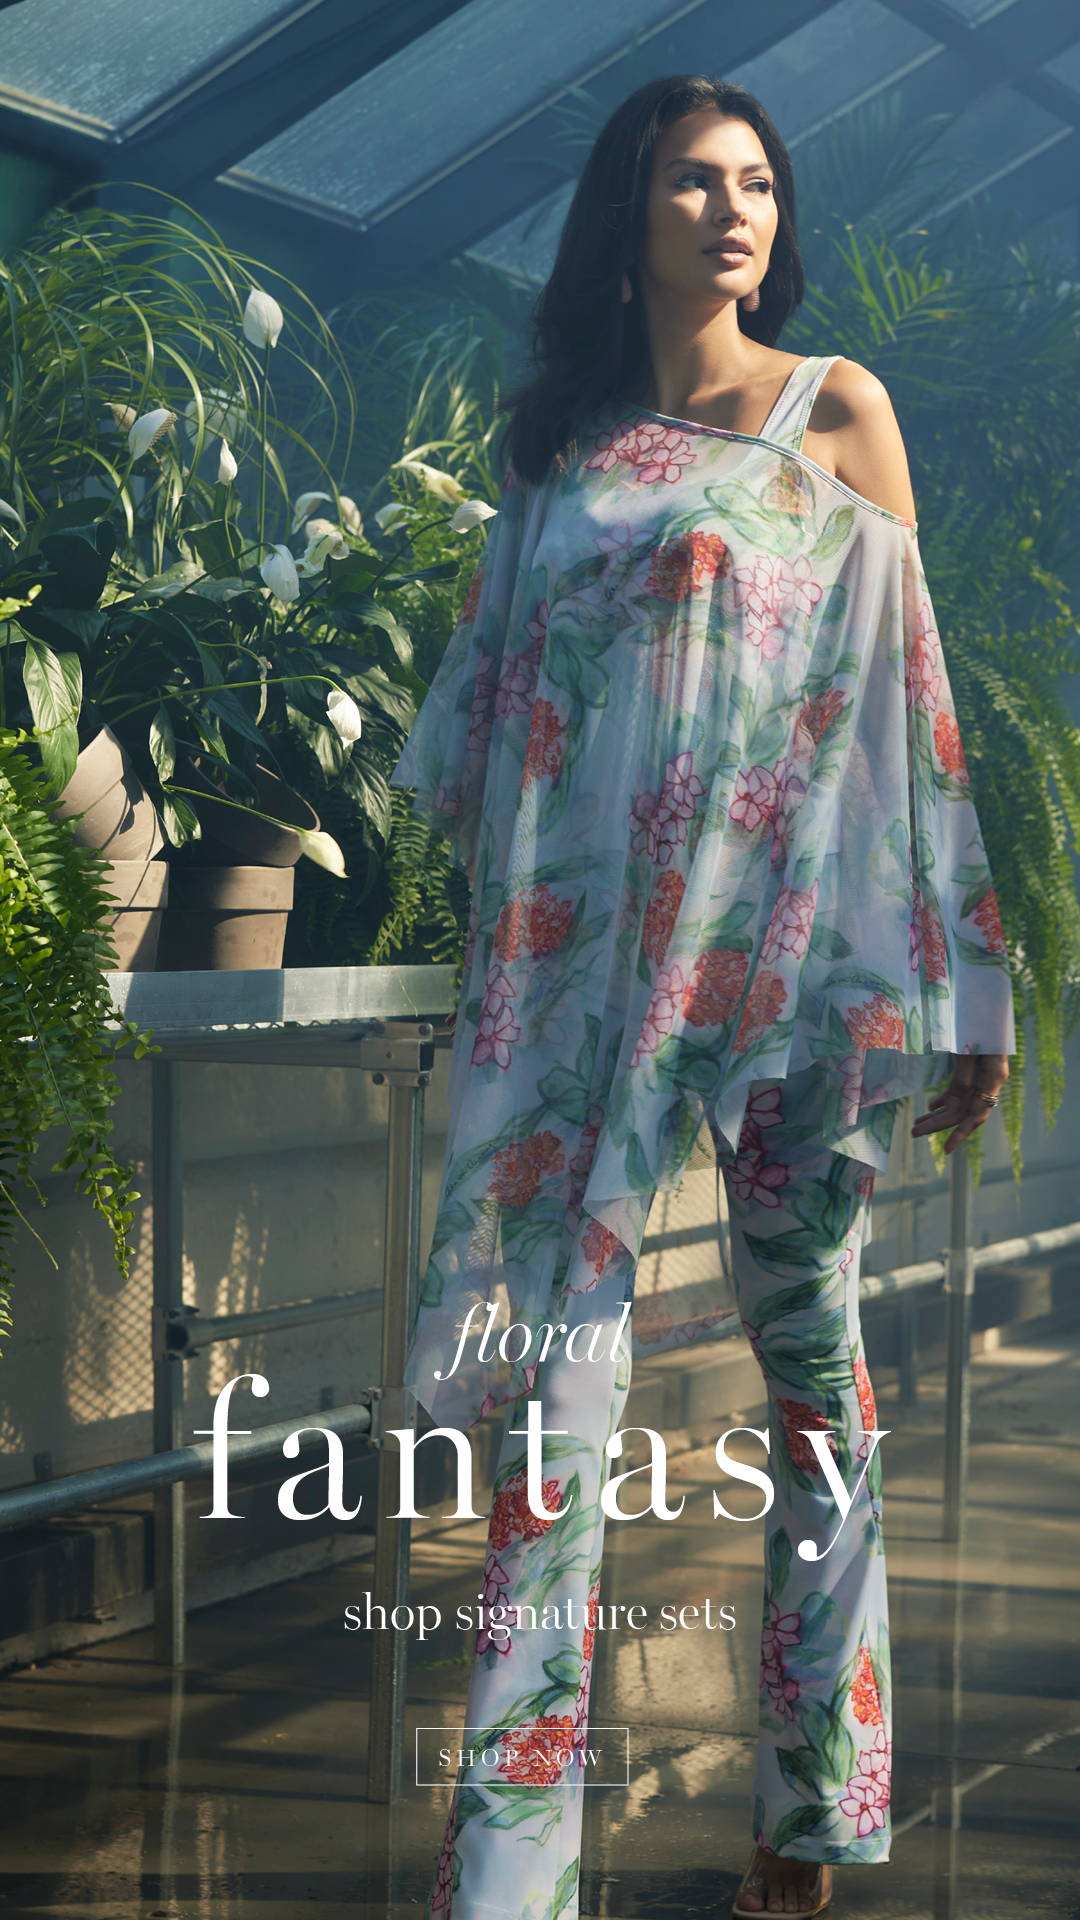 floral fantasy | shop signature sets | Woman wearing mesh floral topper over matching tank tops and pants in a greenhouse for woman's warm weather clothing